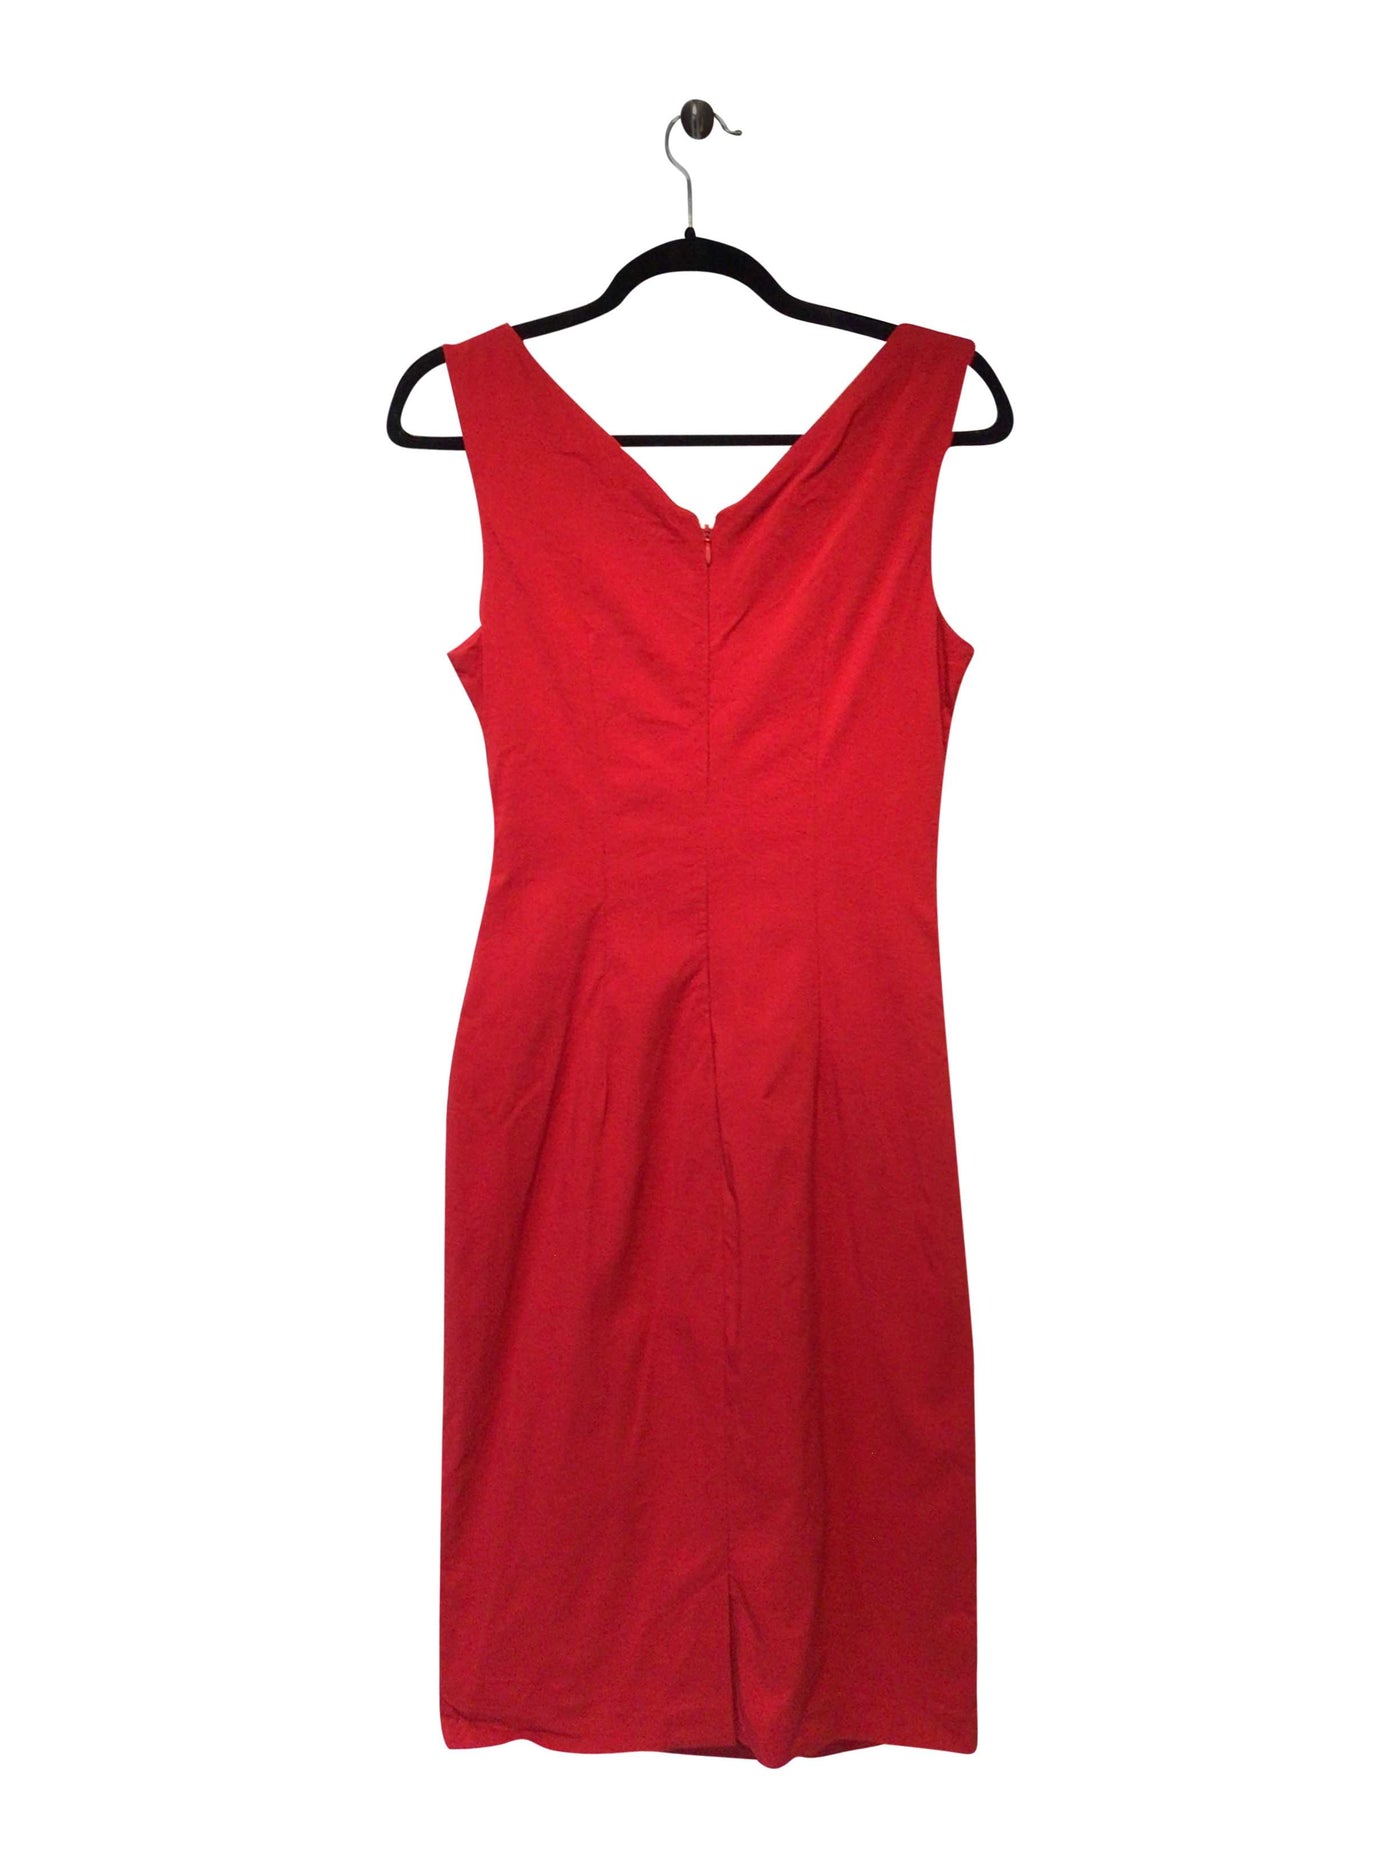 CHATEAU Regular fit Bodycon Dress in Red  -  M  34.95 Koop